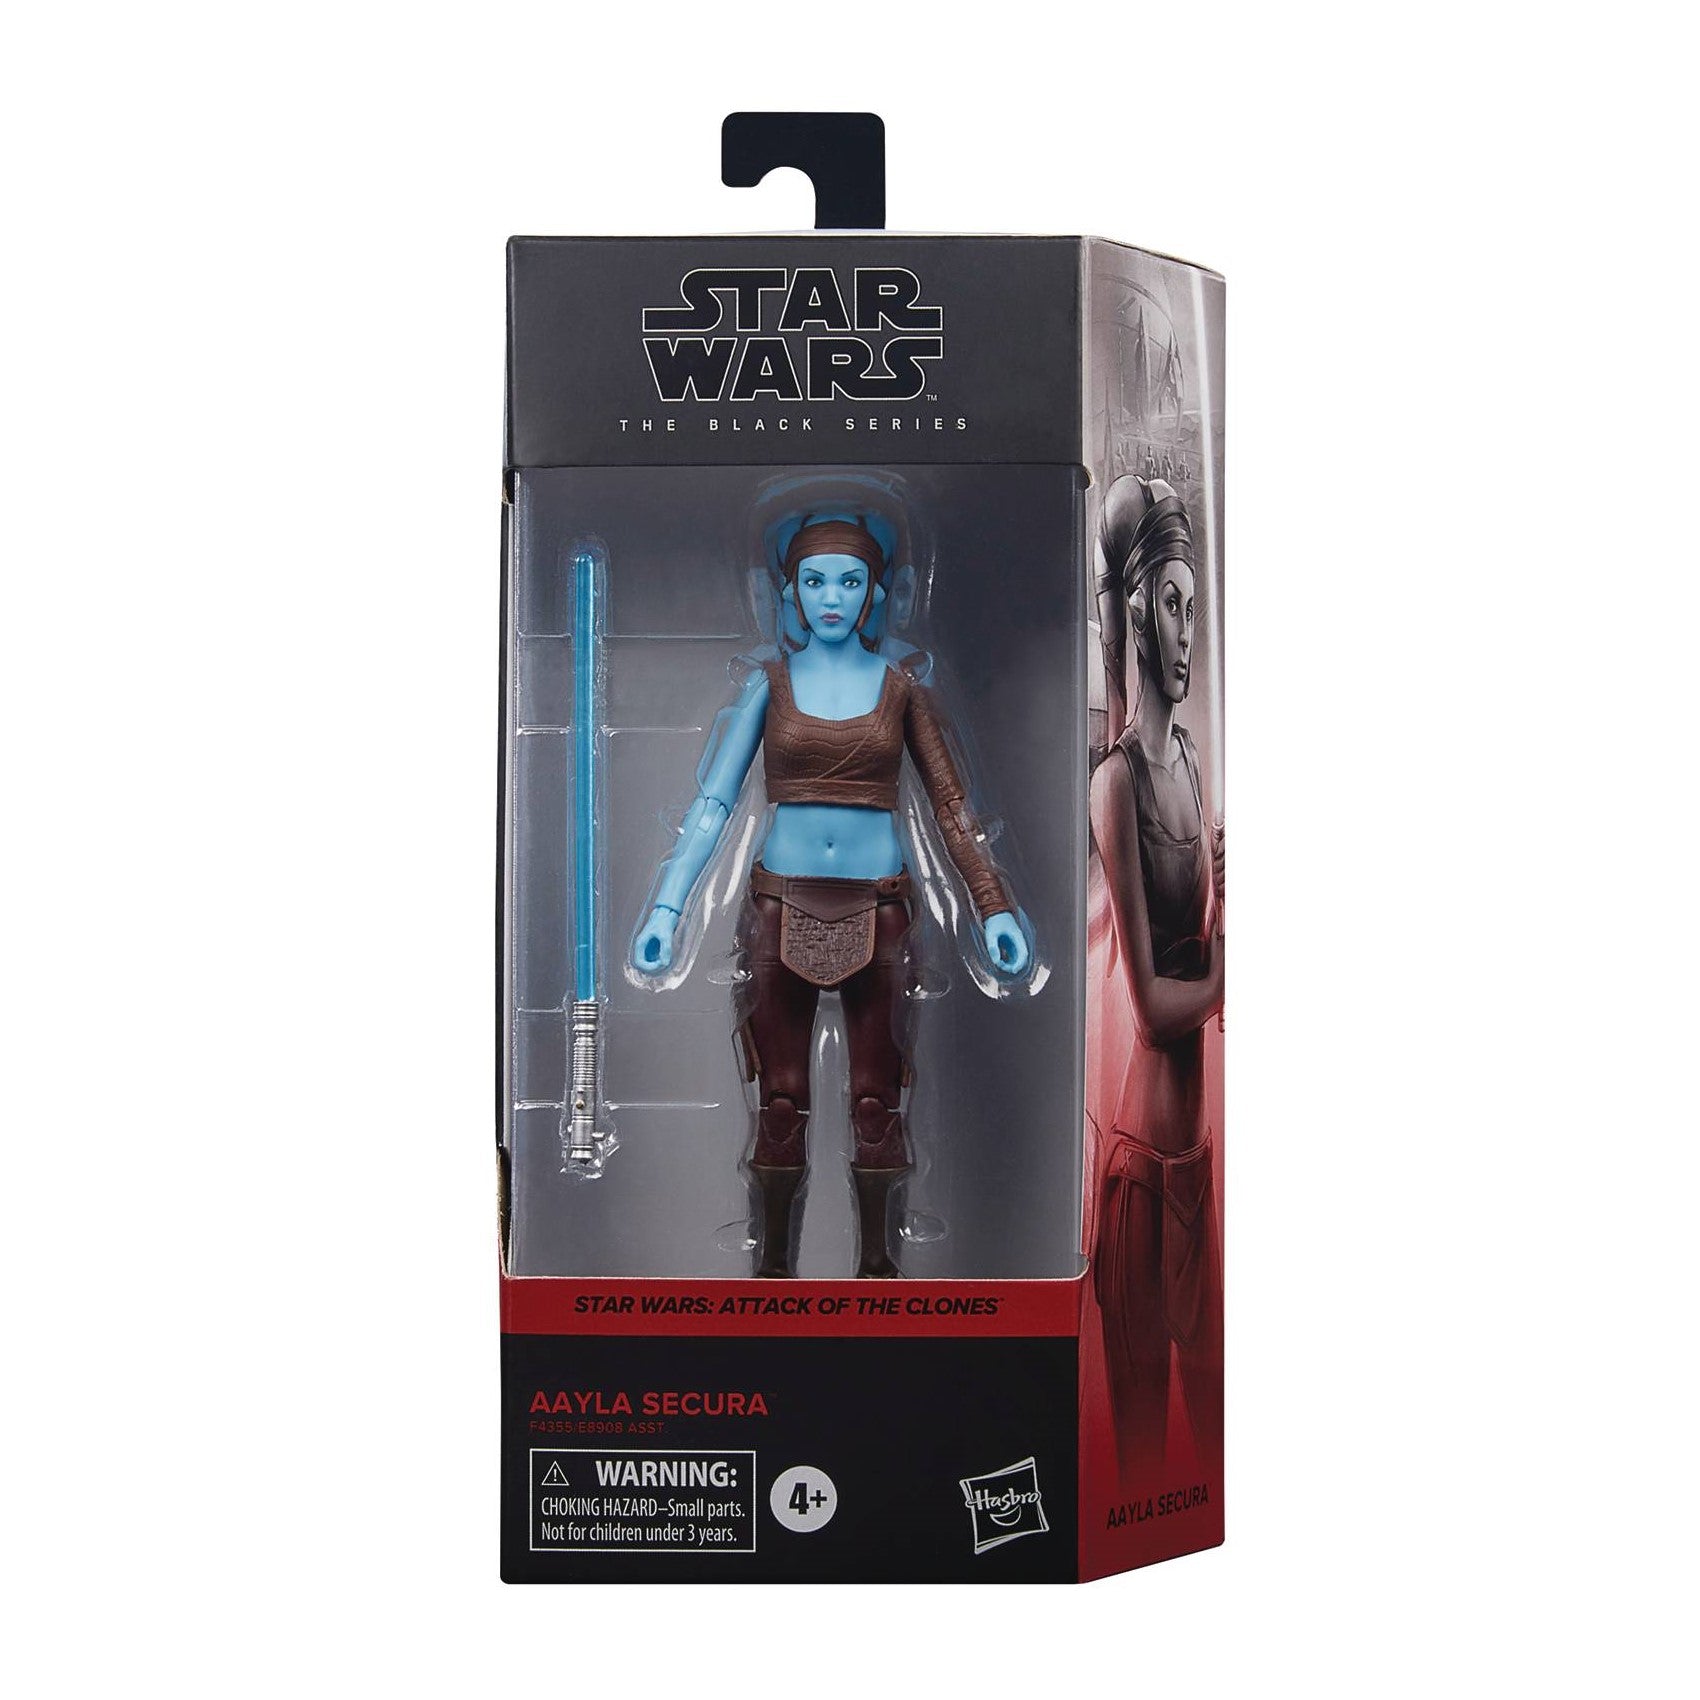 Star Wars Black Series 6" #03 Attack of the Clones Aayla Secura